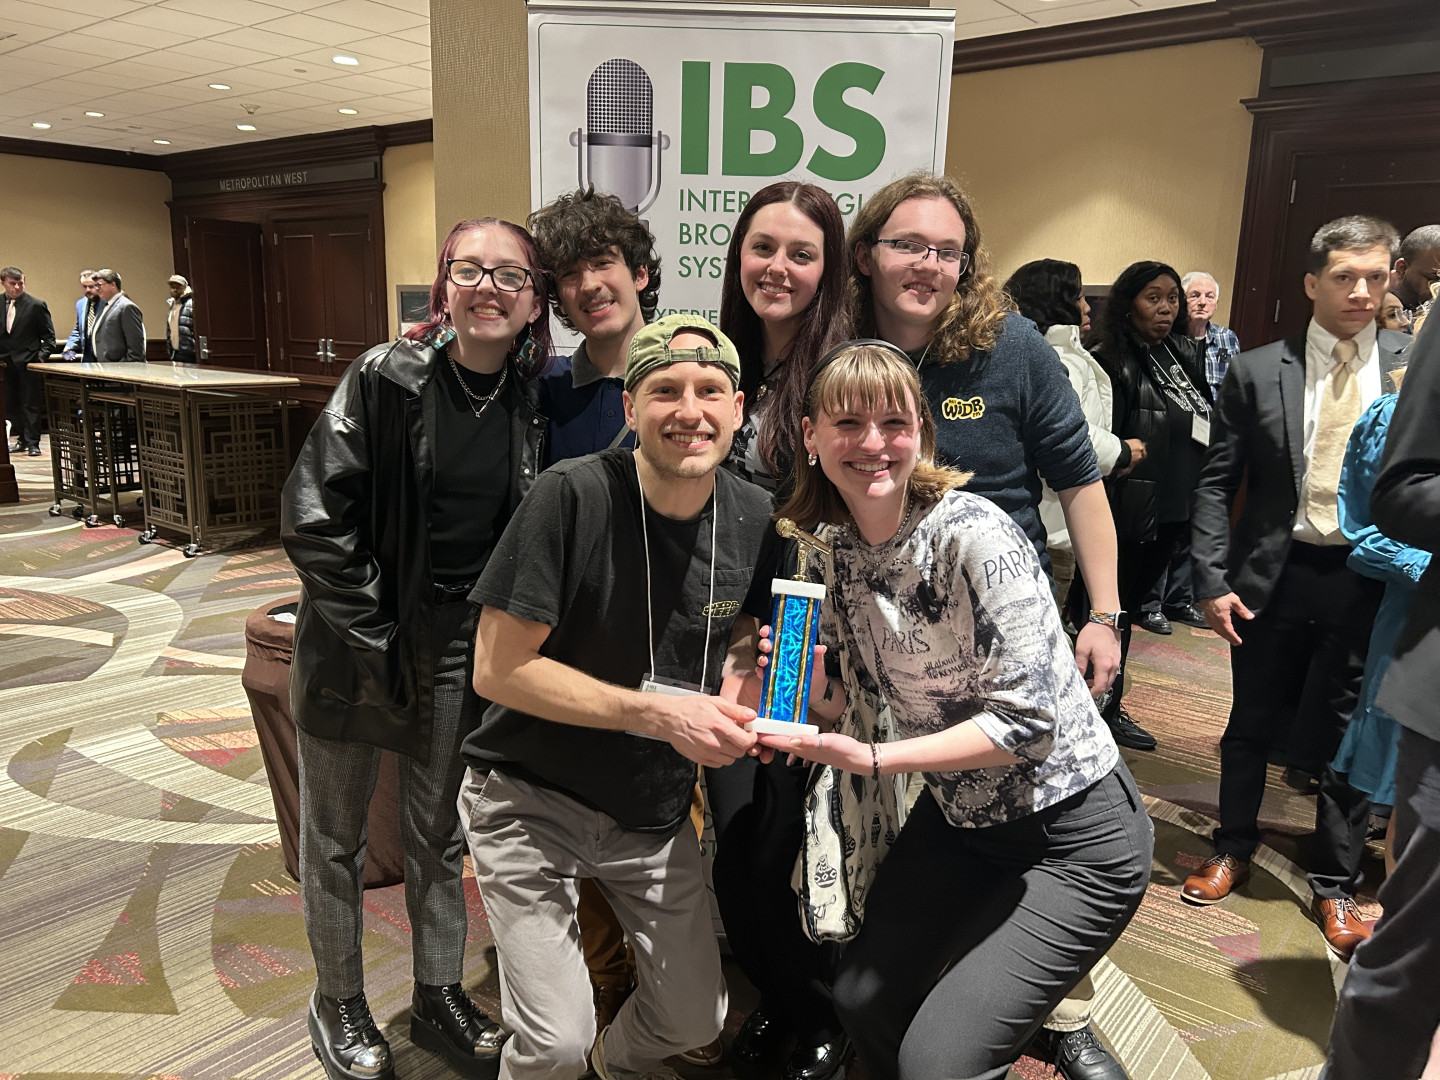 WIDR staff posing with trophy at the IBS Media Awards